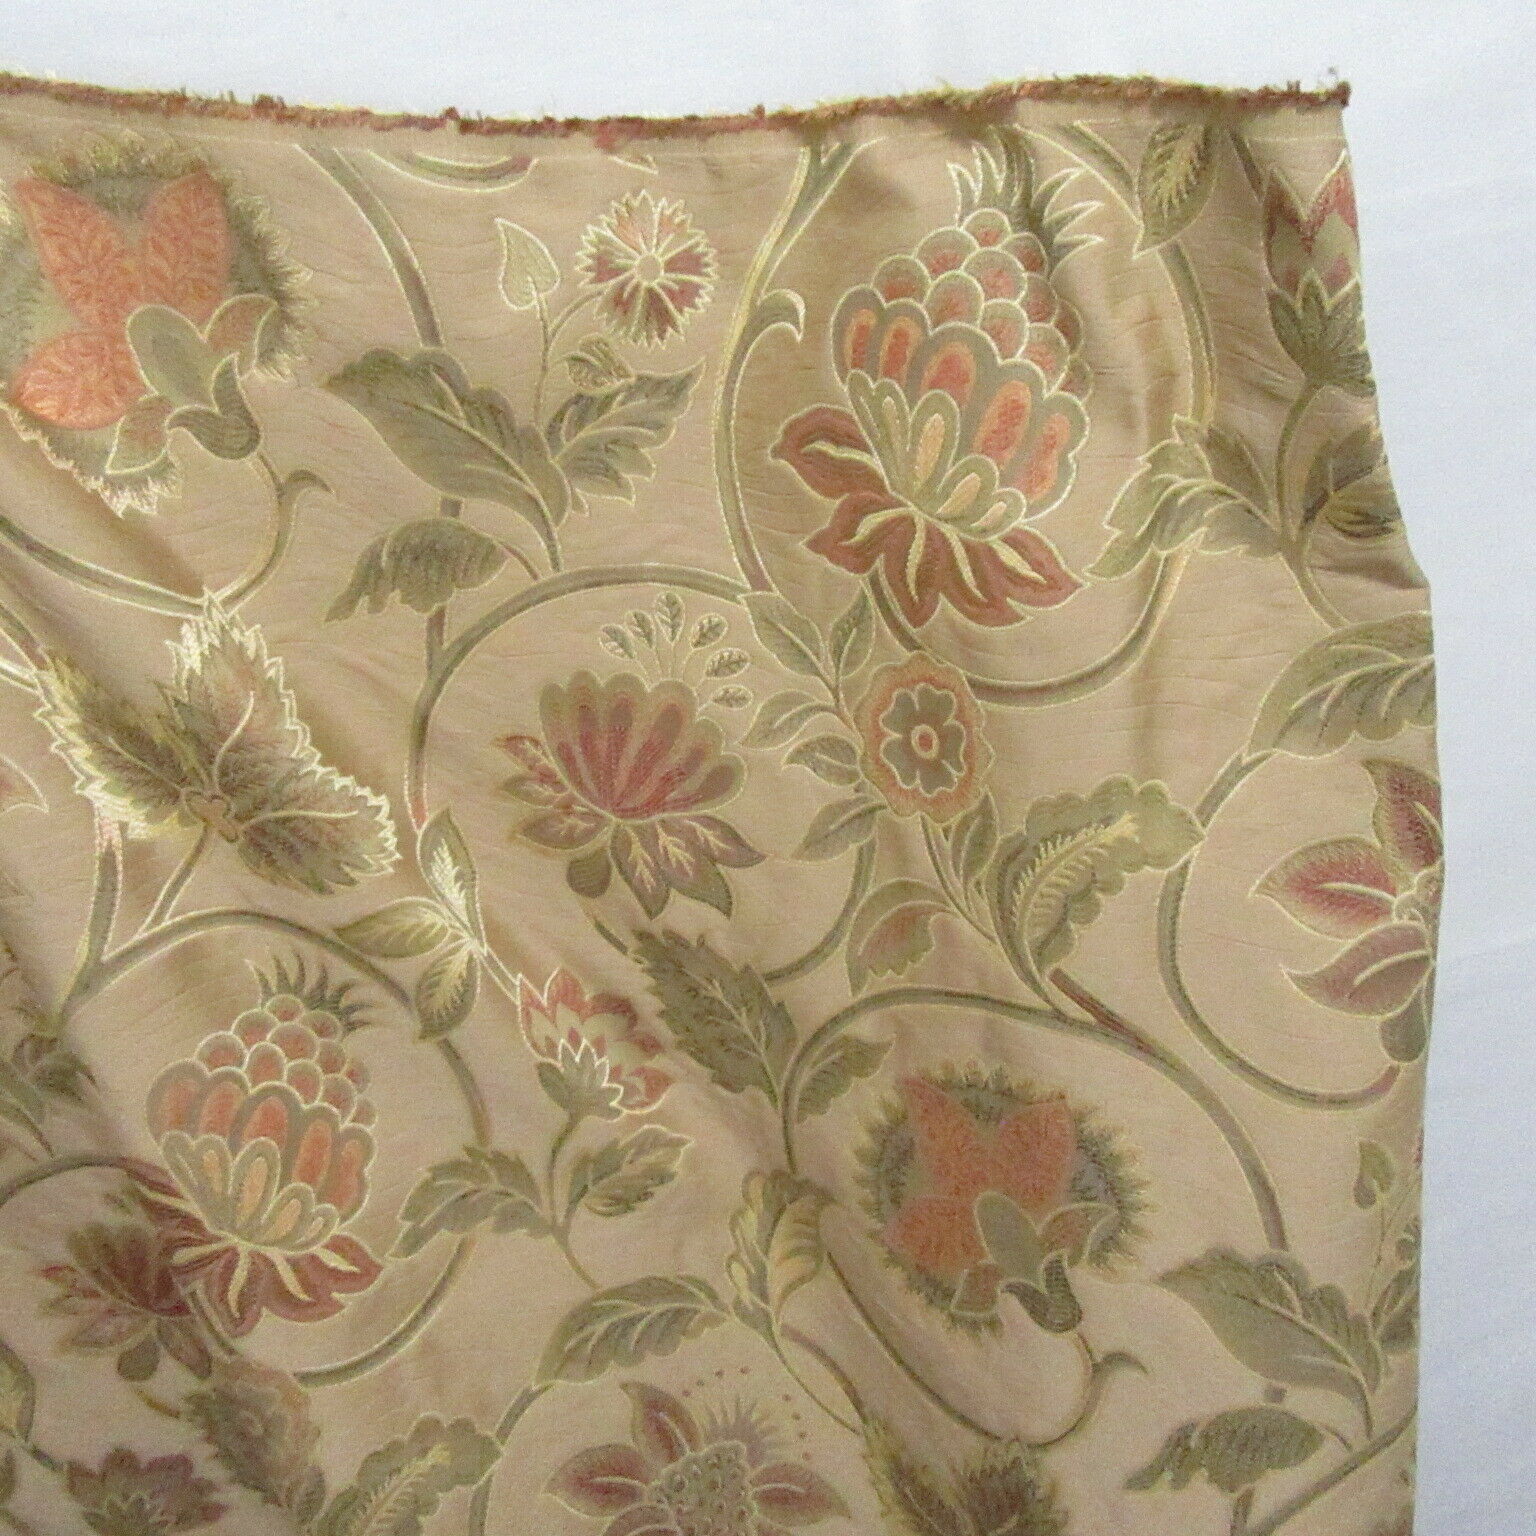 Primary image for Chatsworth Jacobean Floral Embroidered Luxury 2-Yards Fabric Remnant(s)